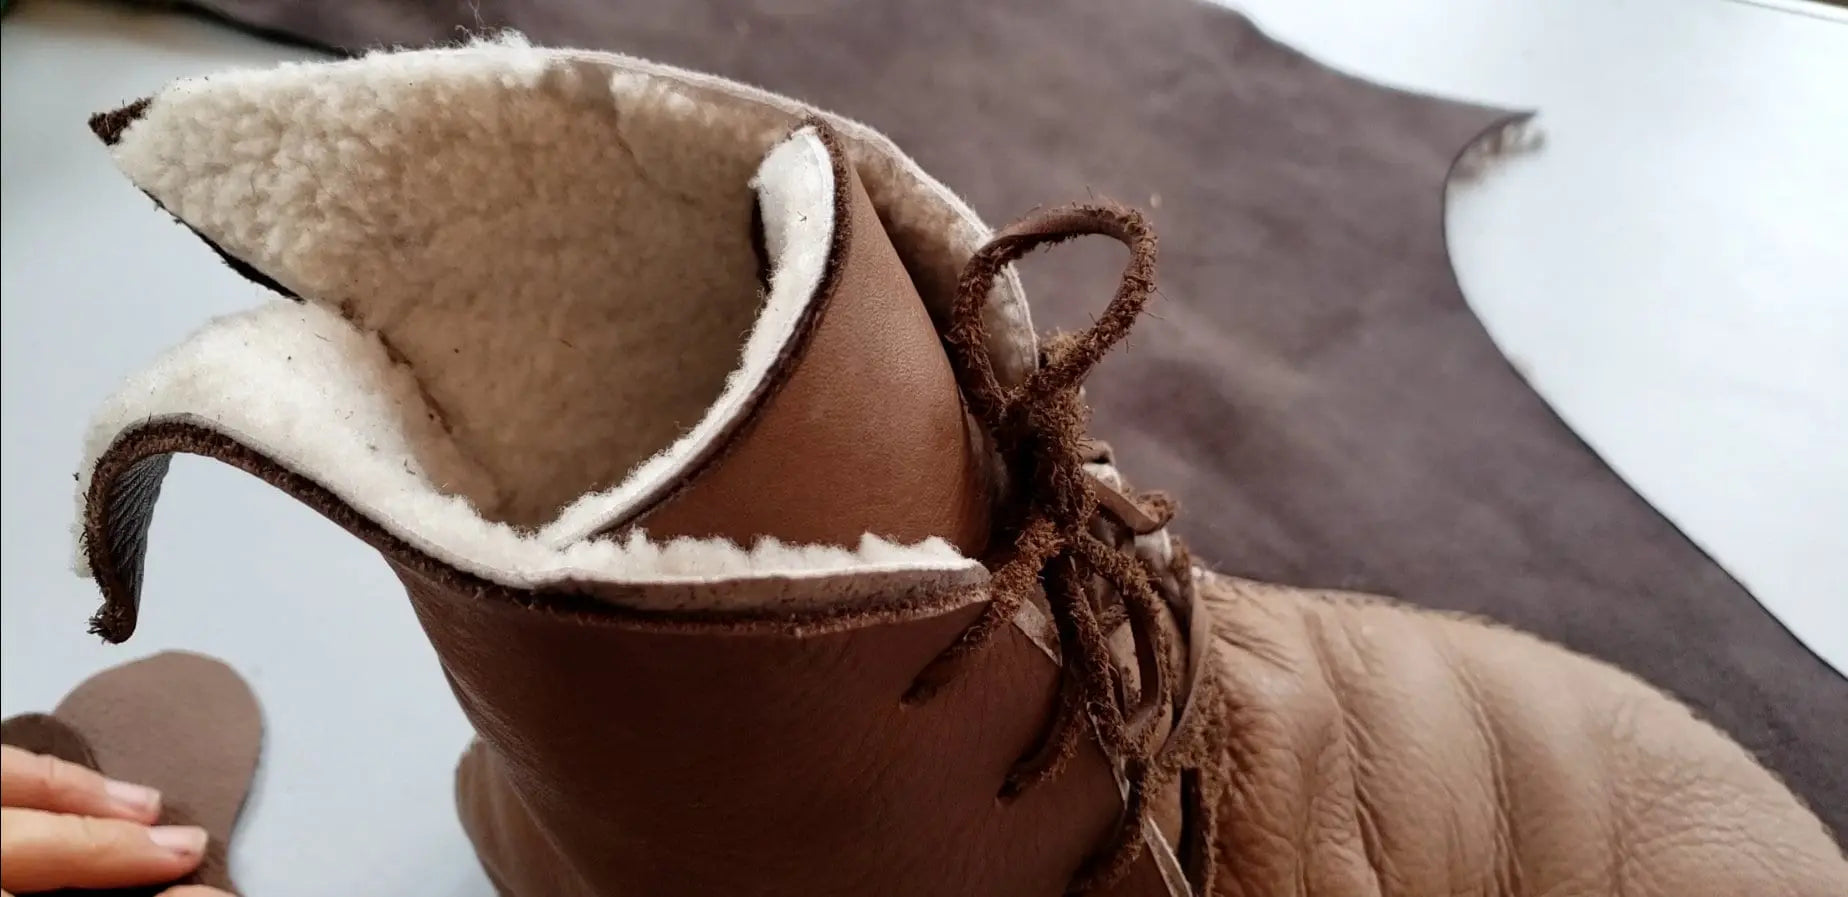 "The Runners" and "Laced-Up Boots" Video + PDF Tutorial with Printable Patterns Earthingmoccasins